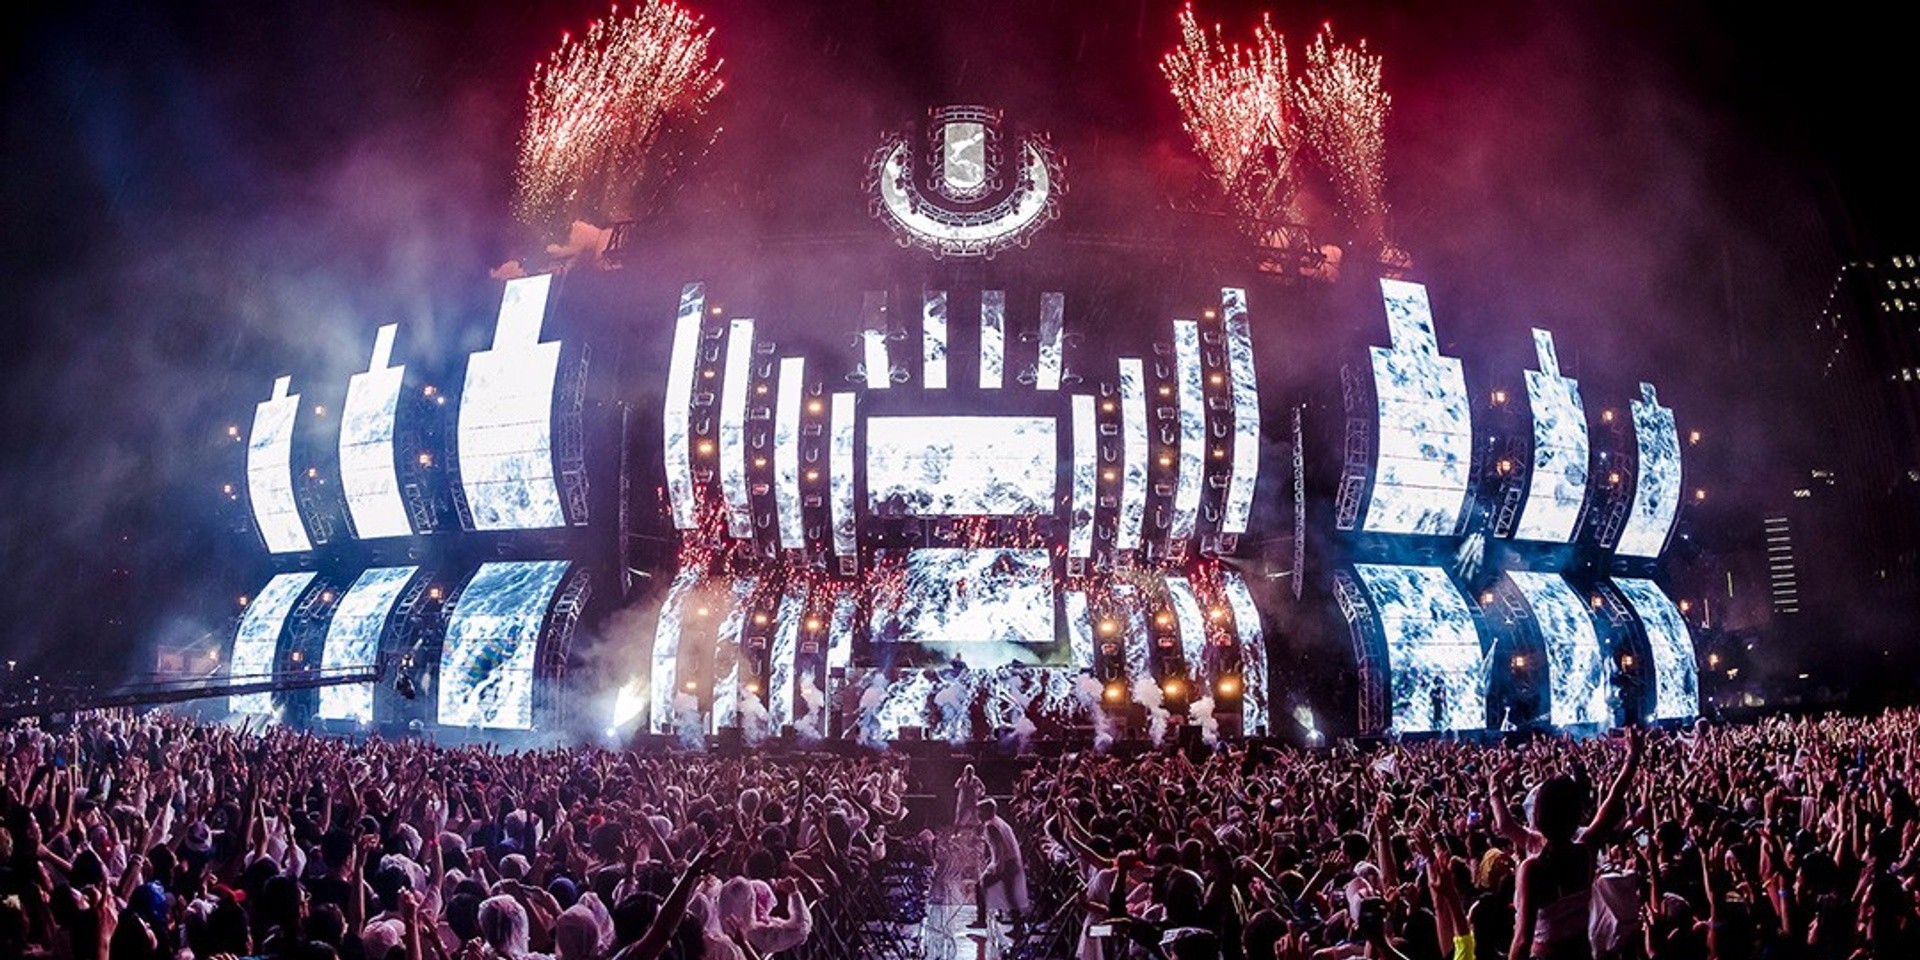 Ultra made 2017 their year: here's a rundown of their best events in Asia